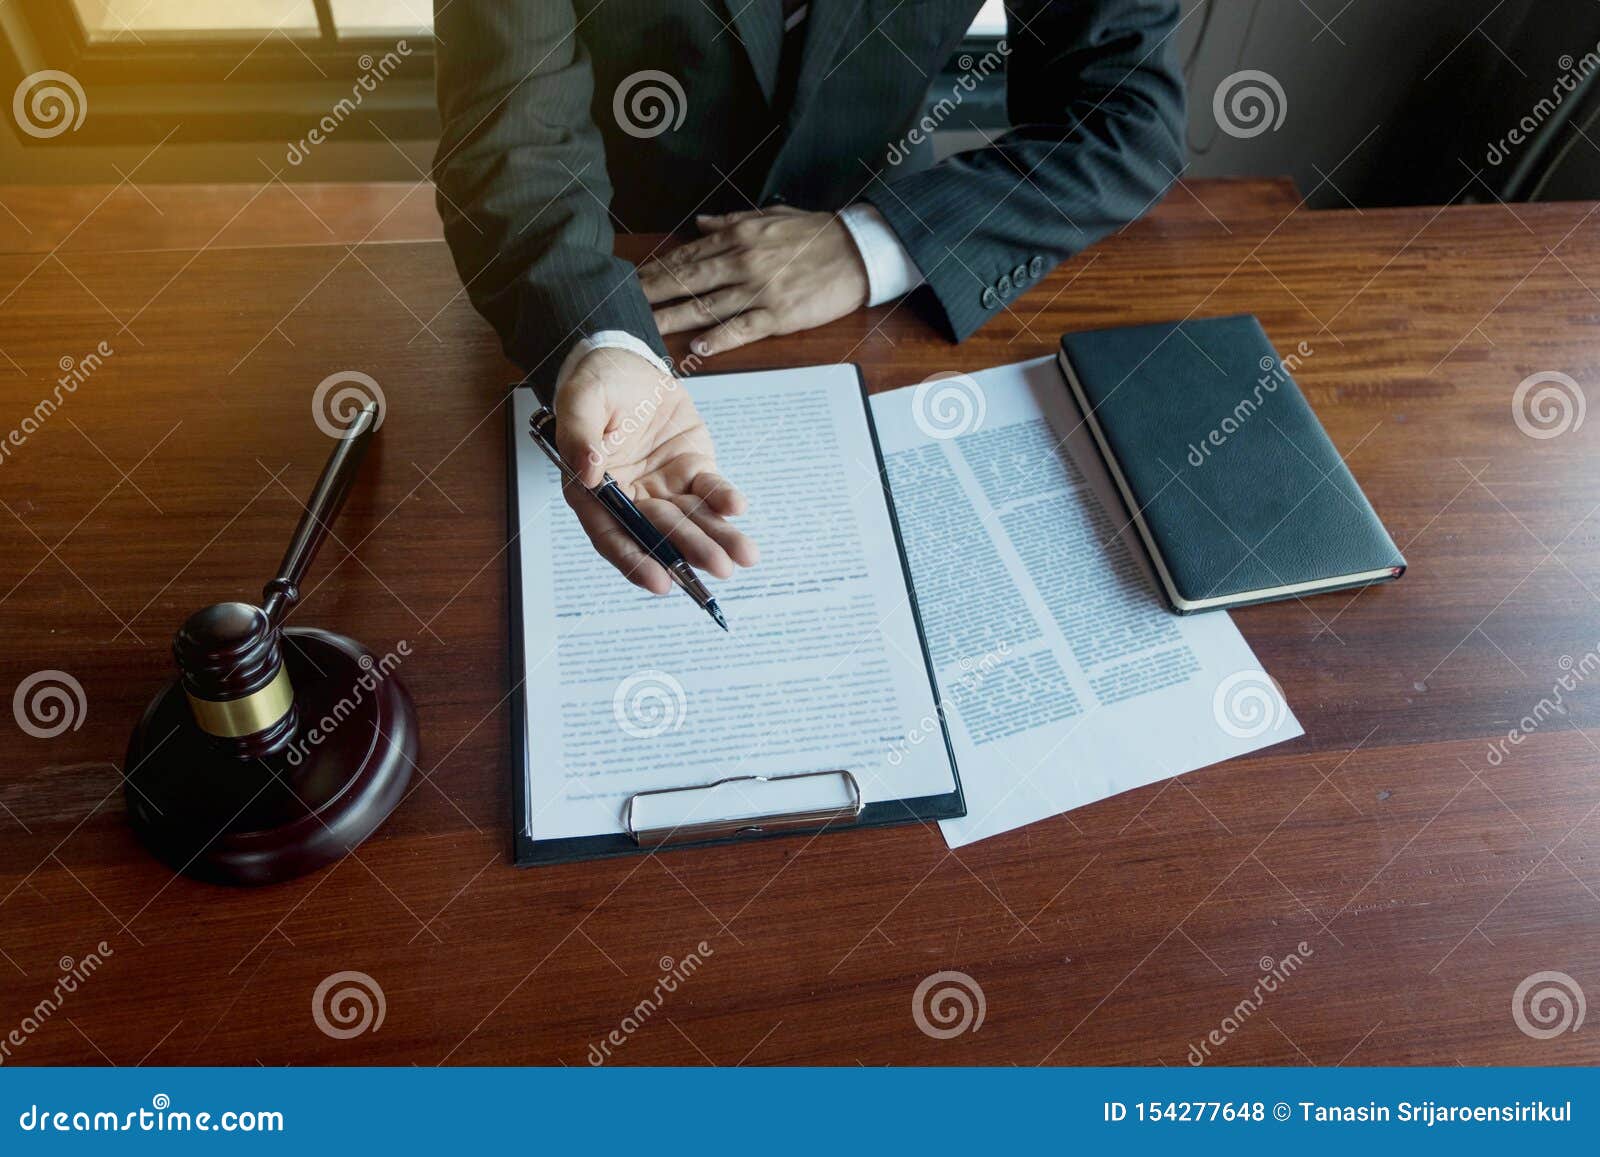 lawyer present client with contract papers on the table in office. consultant lawyer, attorney, court judge, concept